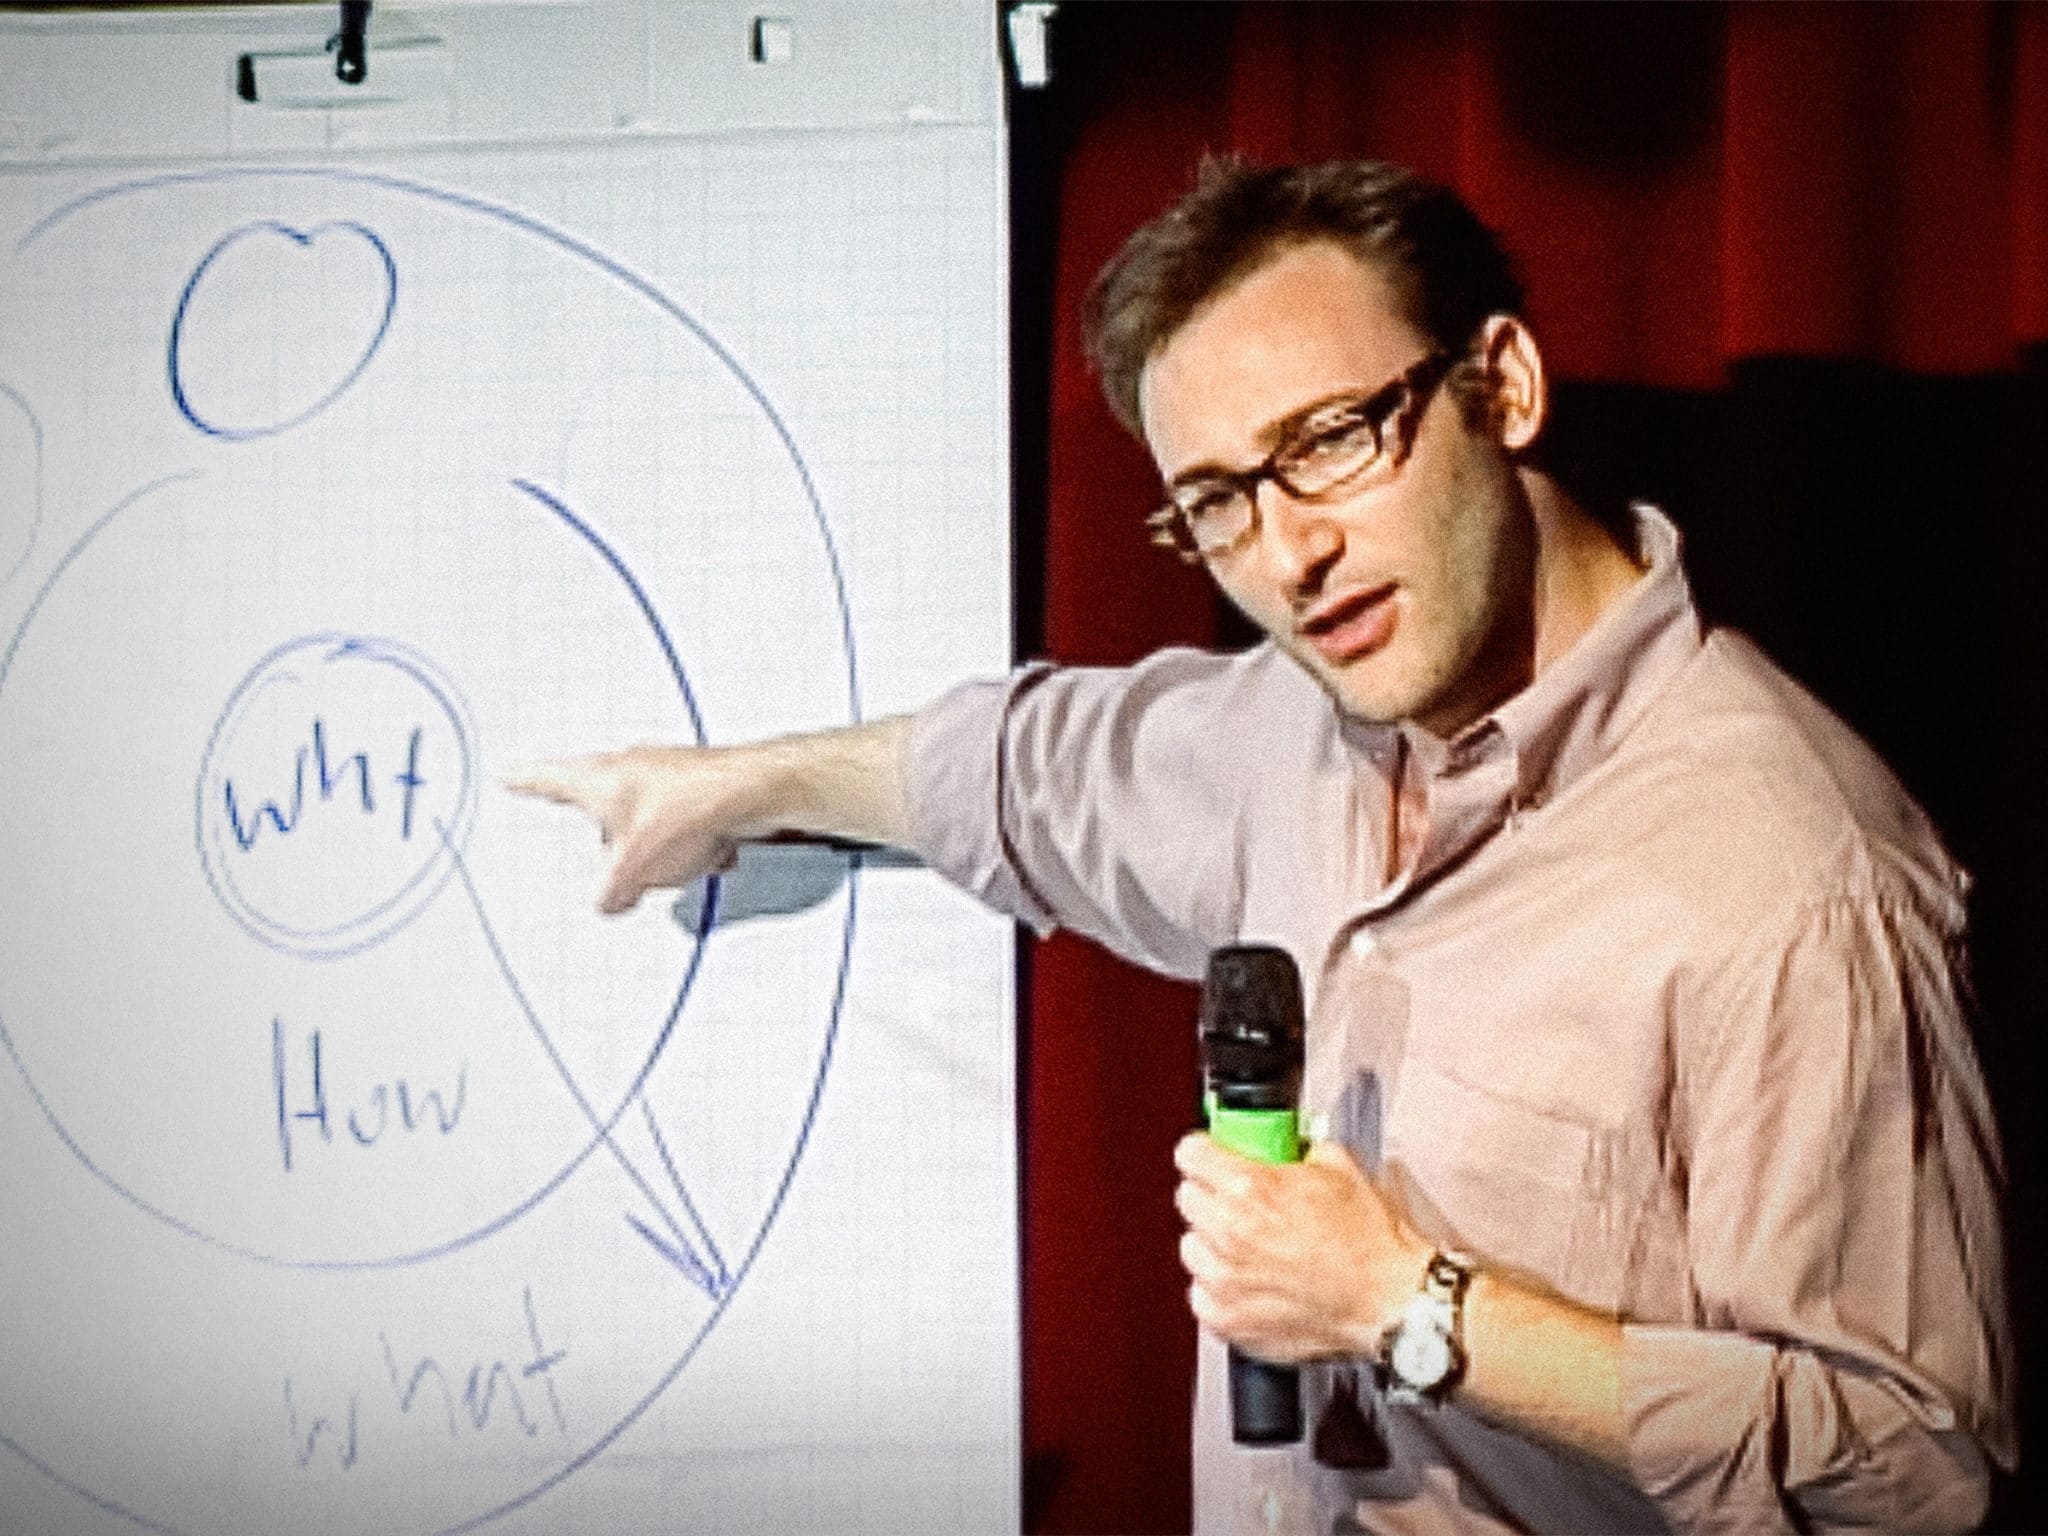 A still from Simon Sinek's viral TED Talk, he points to a flip chart with circles featuring "why" in the middle. 